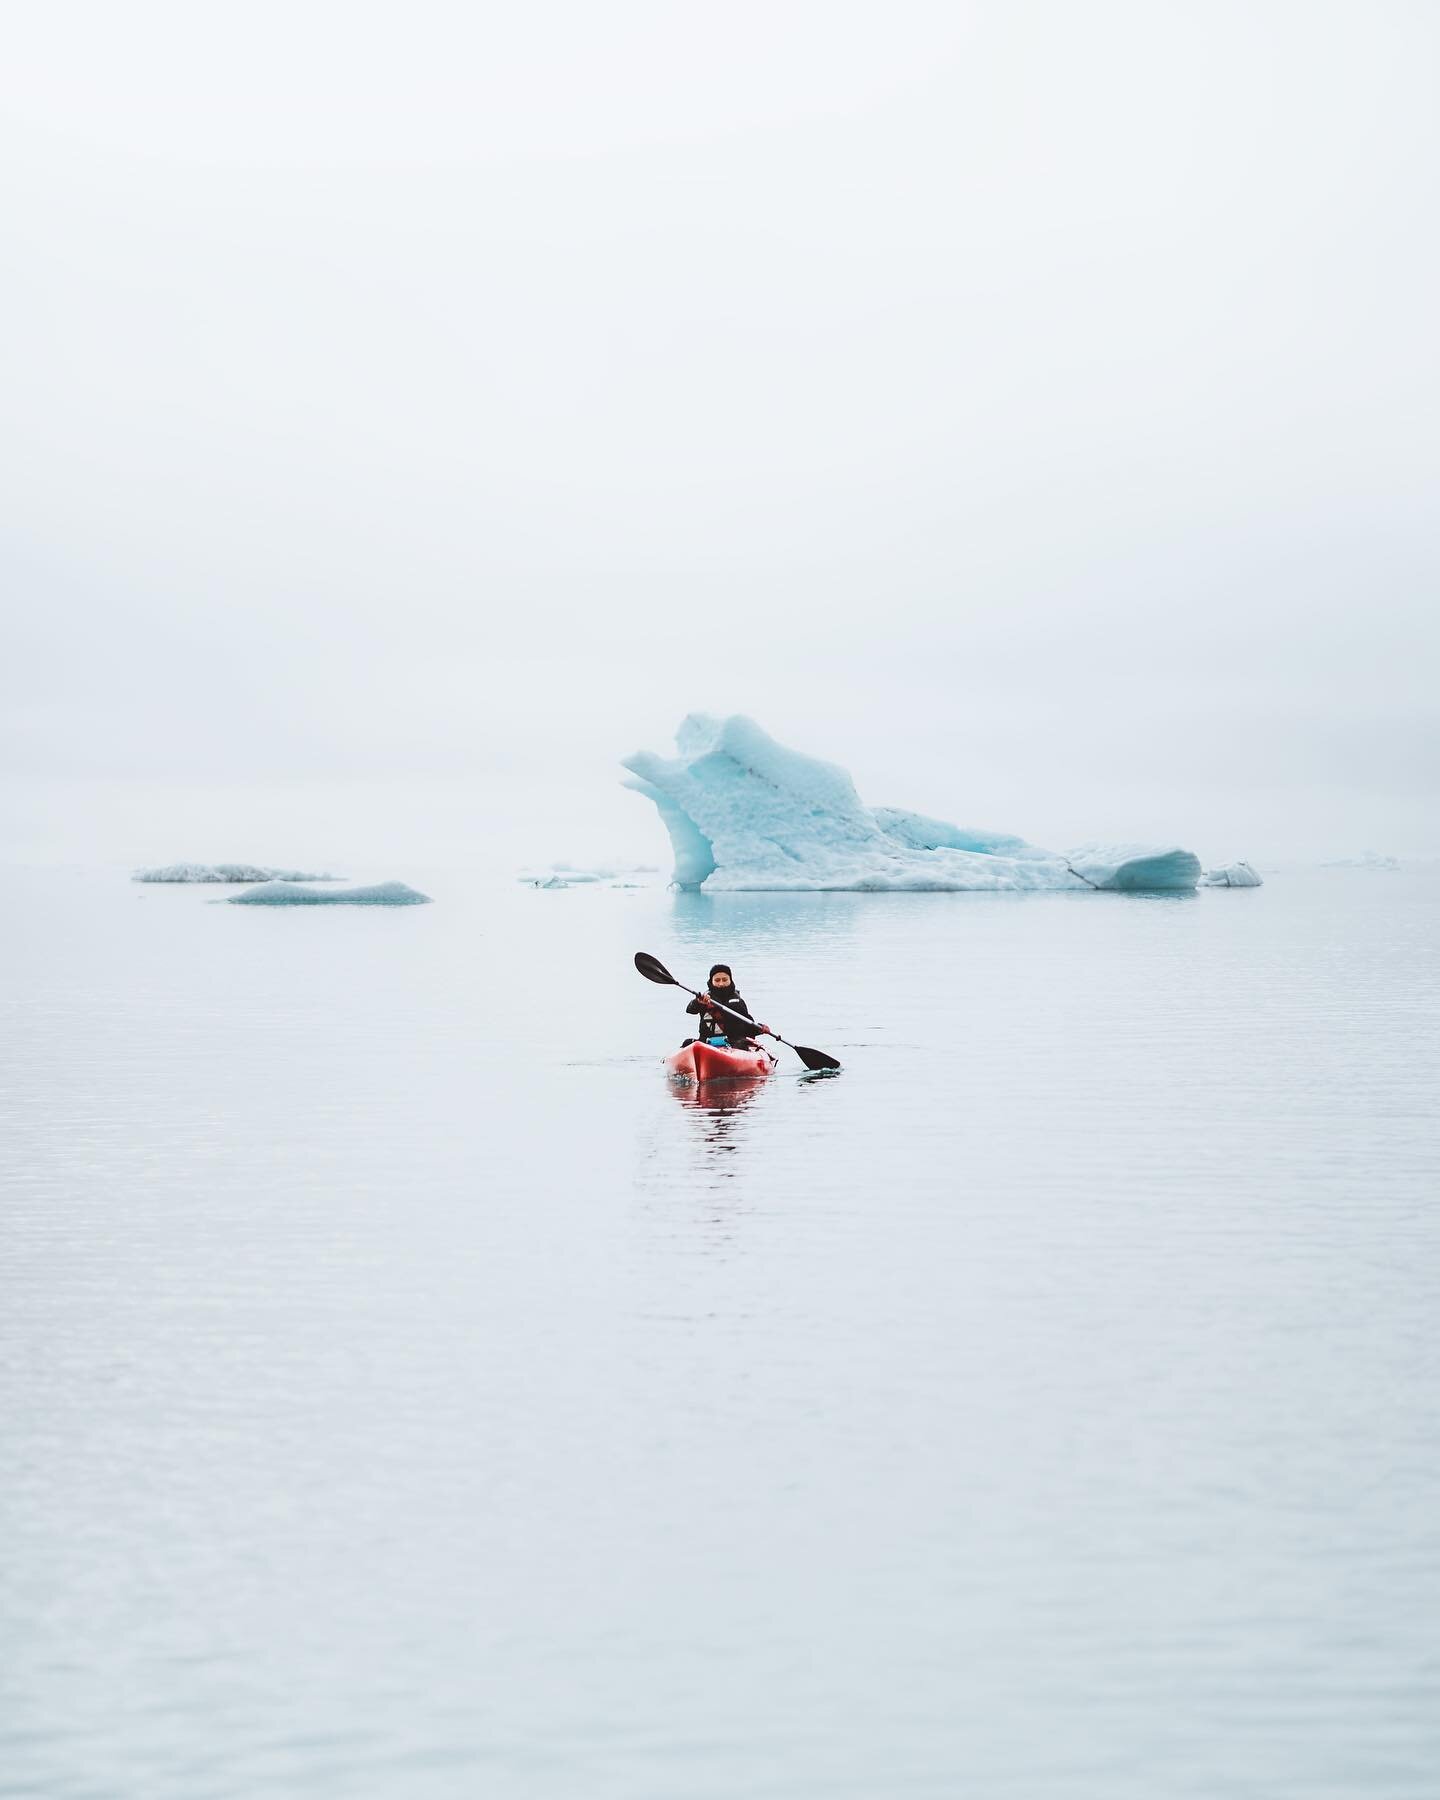 Kayaking among ice bergs 🤍

I'm so excited to be heading back to Iceland, it's got me looking through all my old images again! I can't wait to come back with new memories and experiences!!

#Iceland #inspiredbyiceland #hiddeniceland #kayak #kayaking